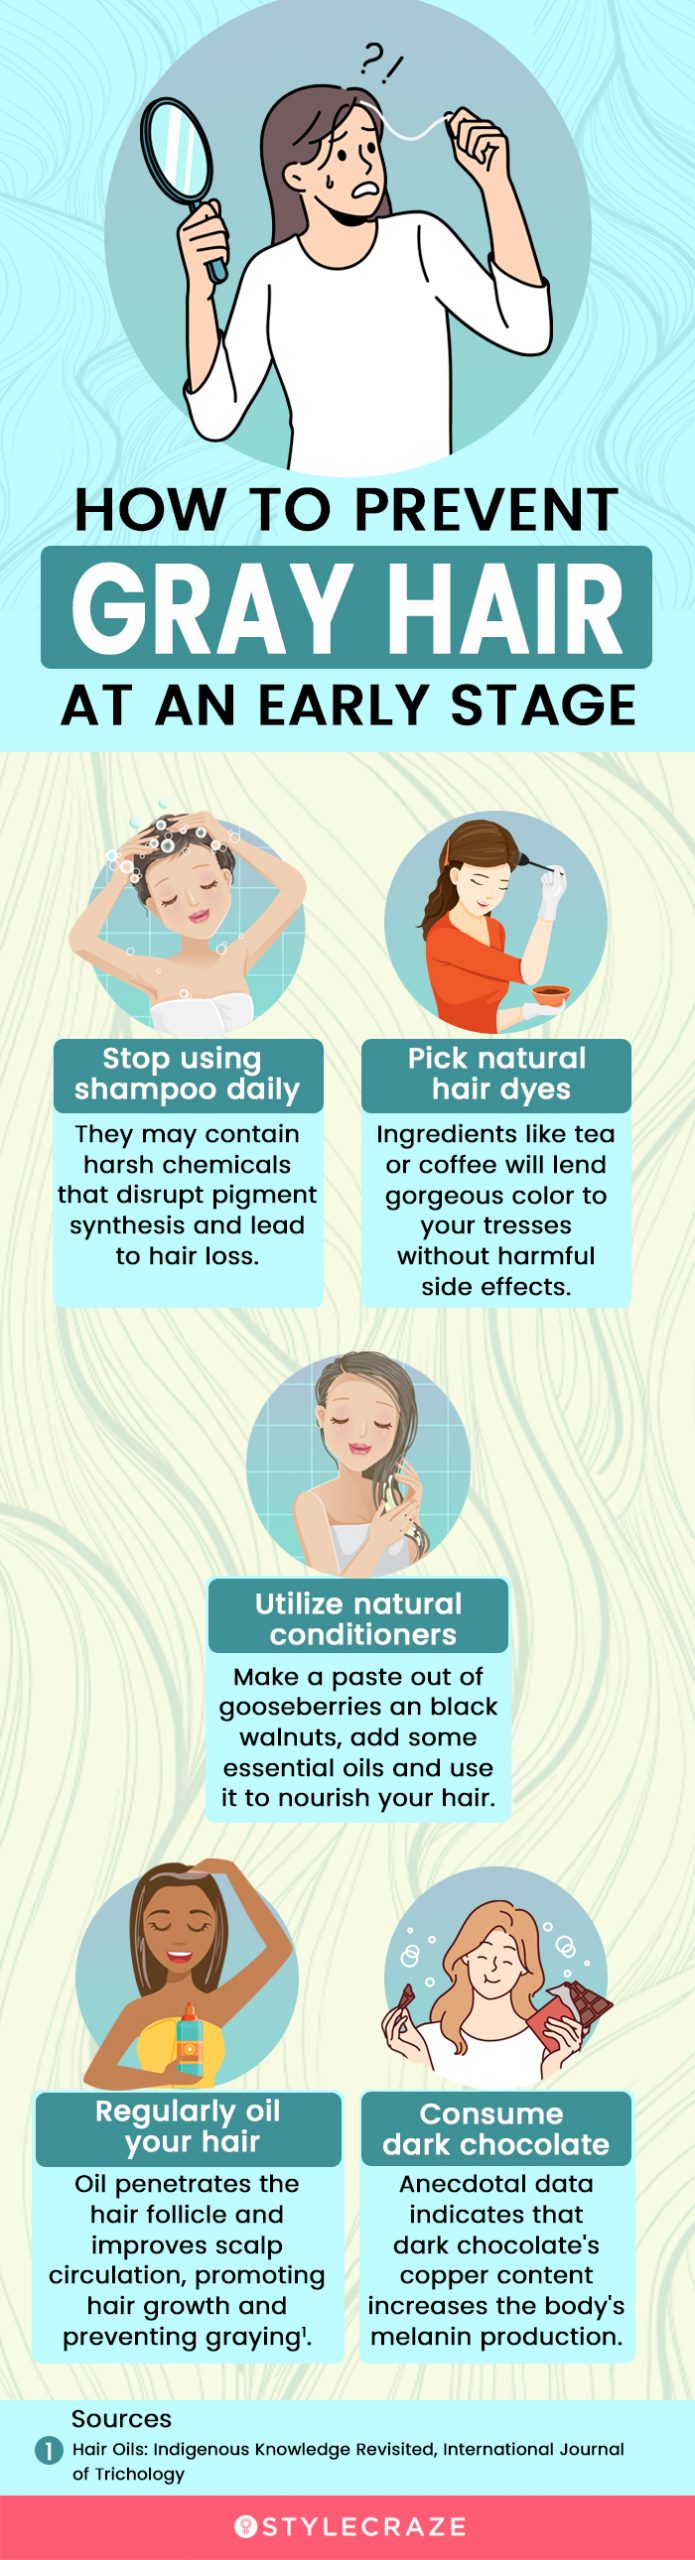 how to prevent gray hair at an early stage [infographic]